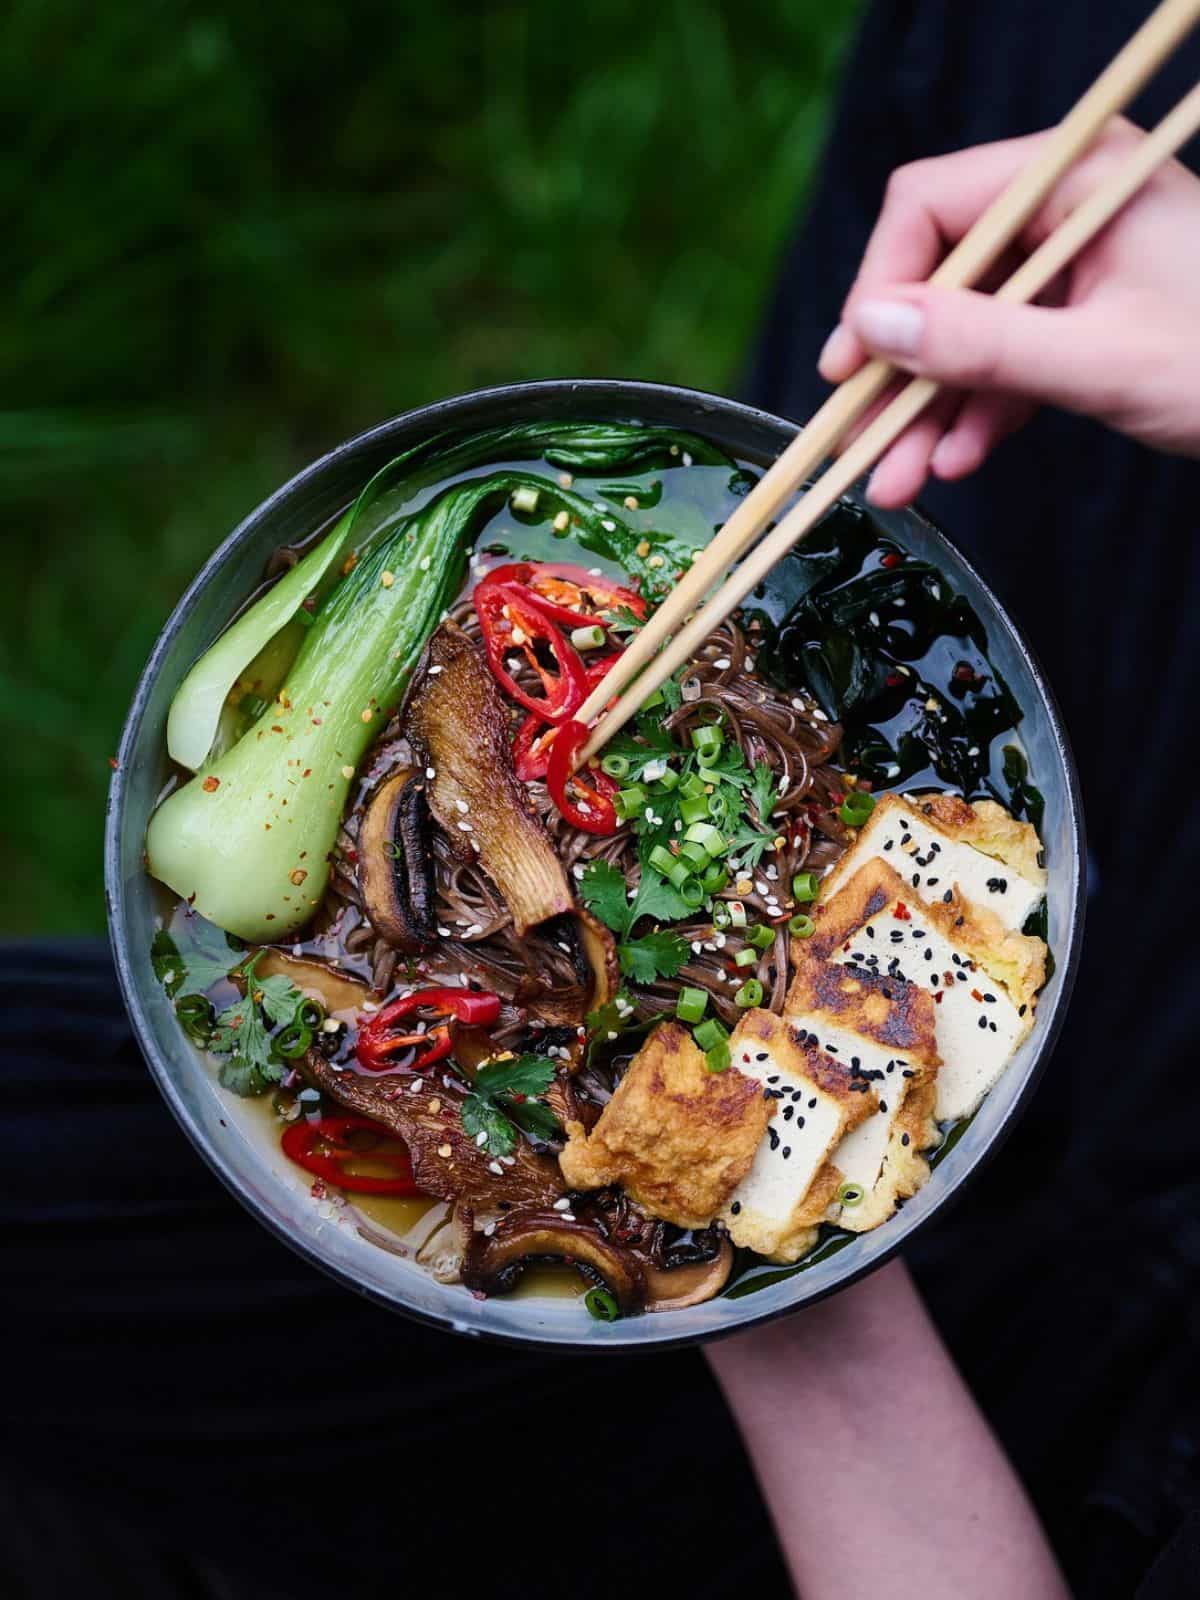 bowl containing tofu, pak choi, chillis in a ramen with a person picking some up with chopsticks.